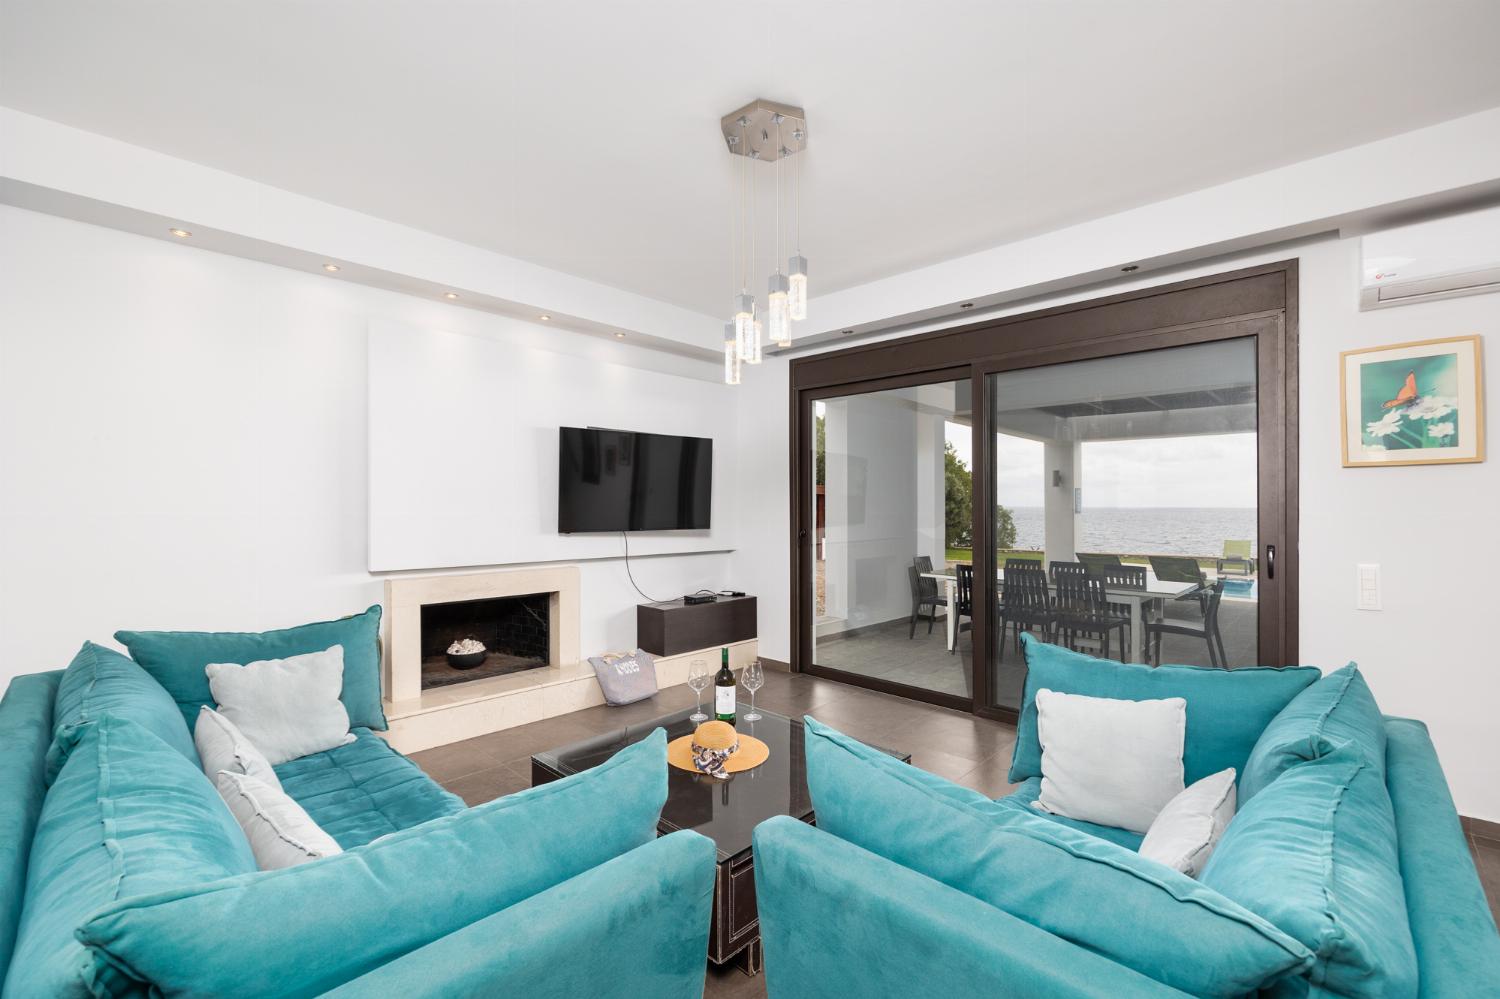 Open-plan living room with sofas, dining area, kitchen, ornamental fireplace, A/C, WiFi internet, satellite TV, and sea views